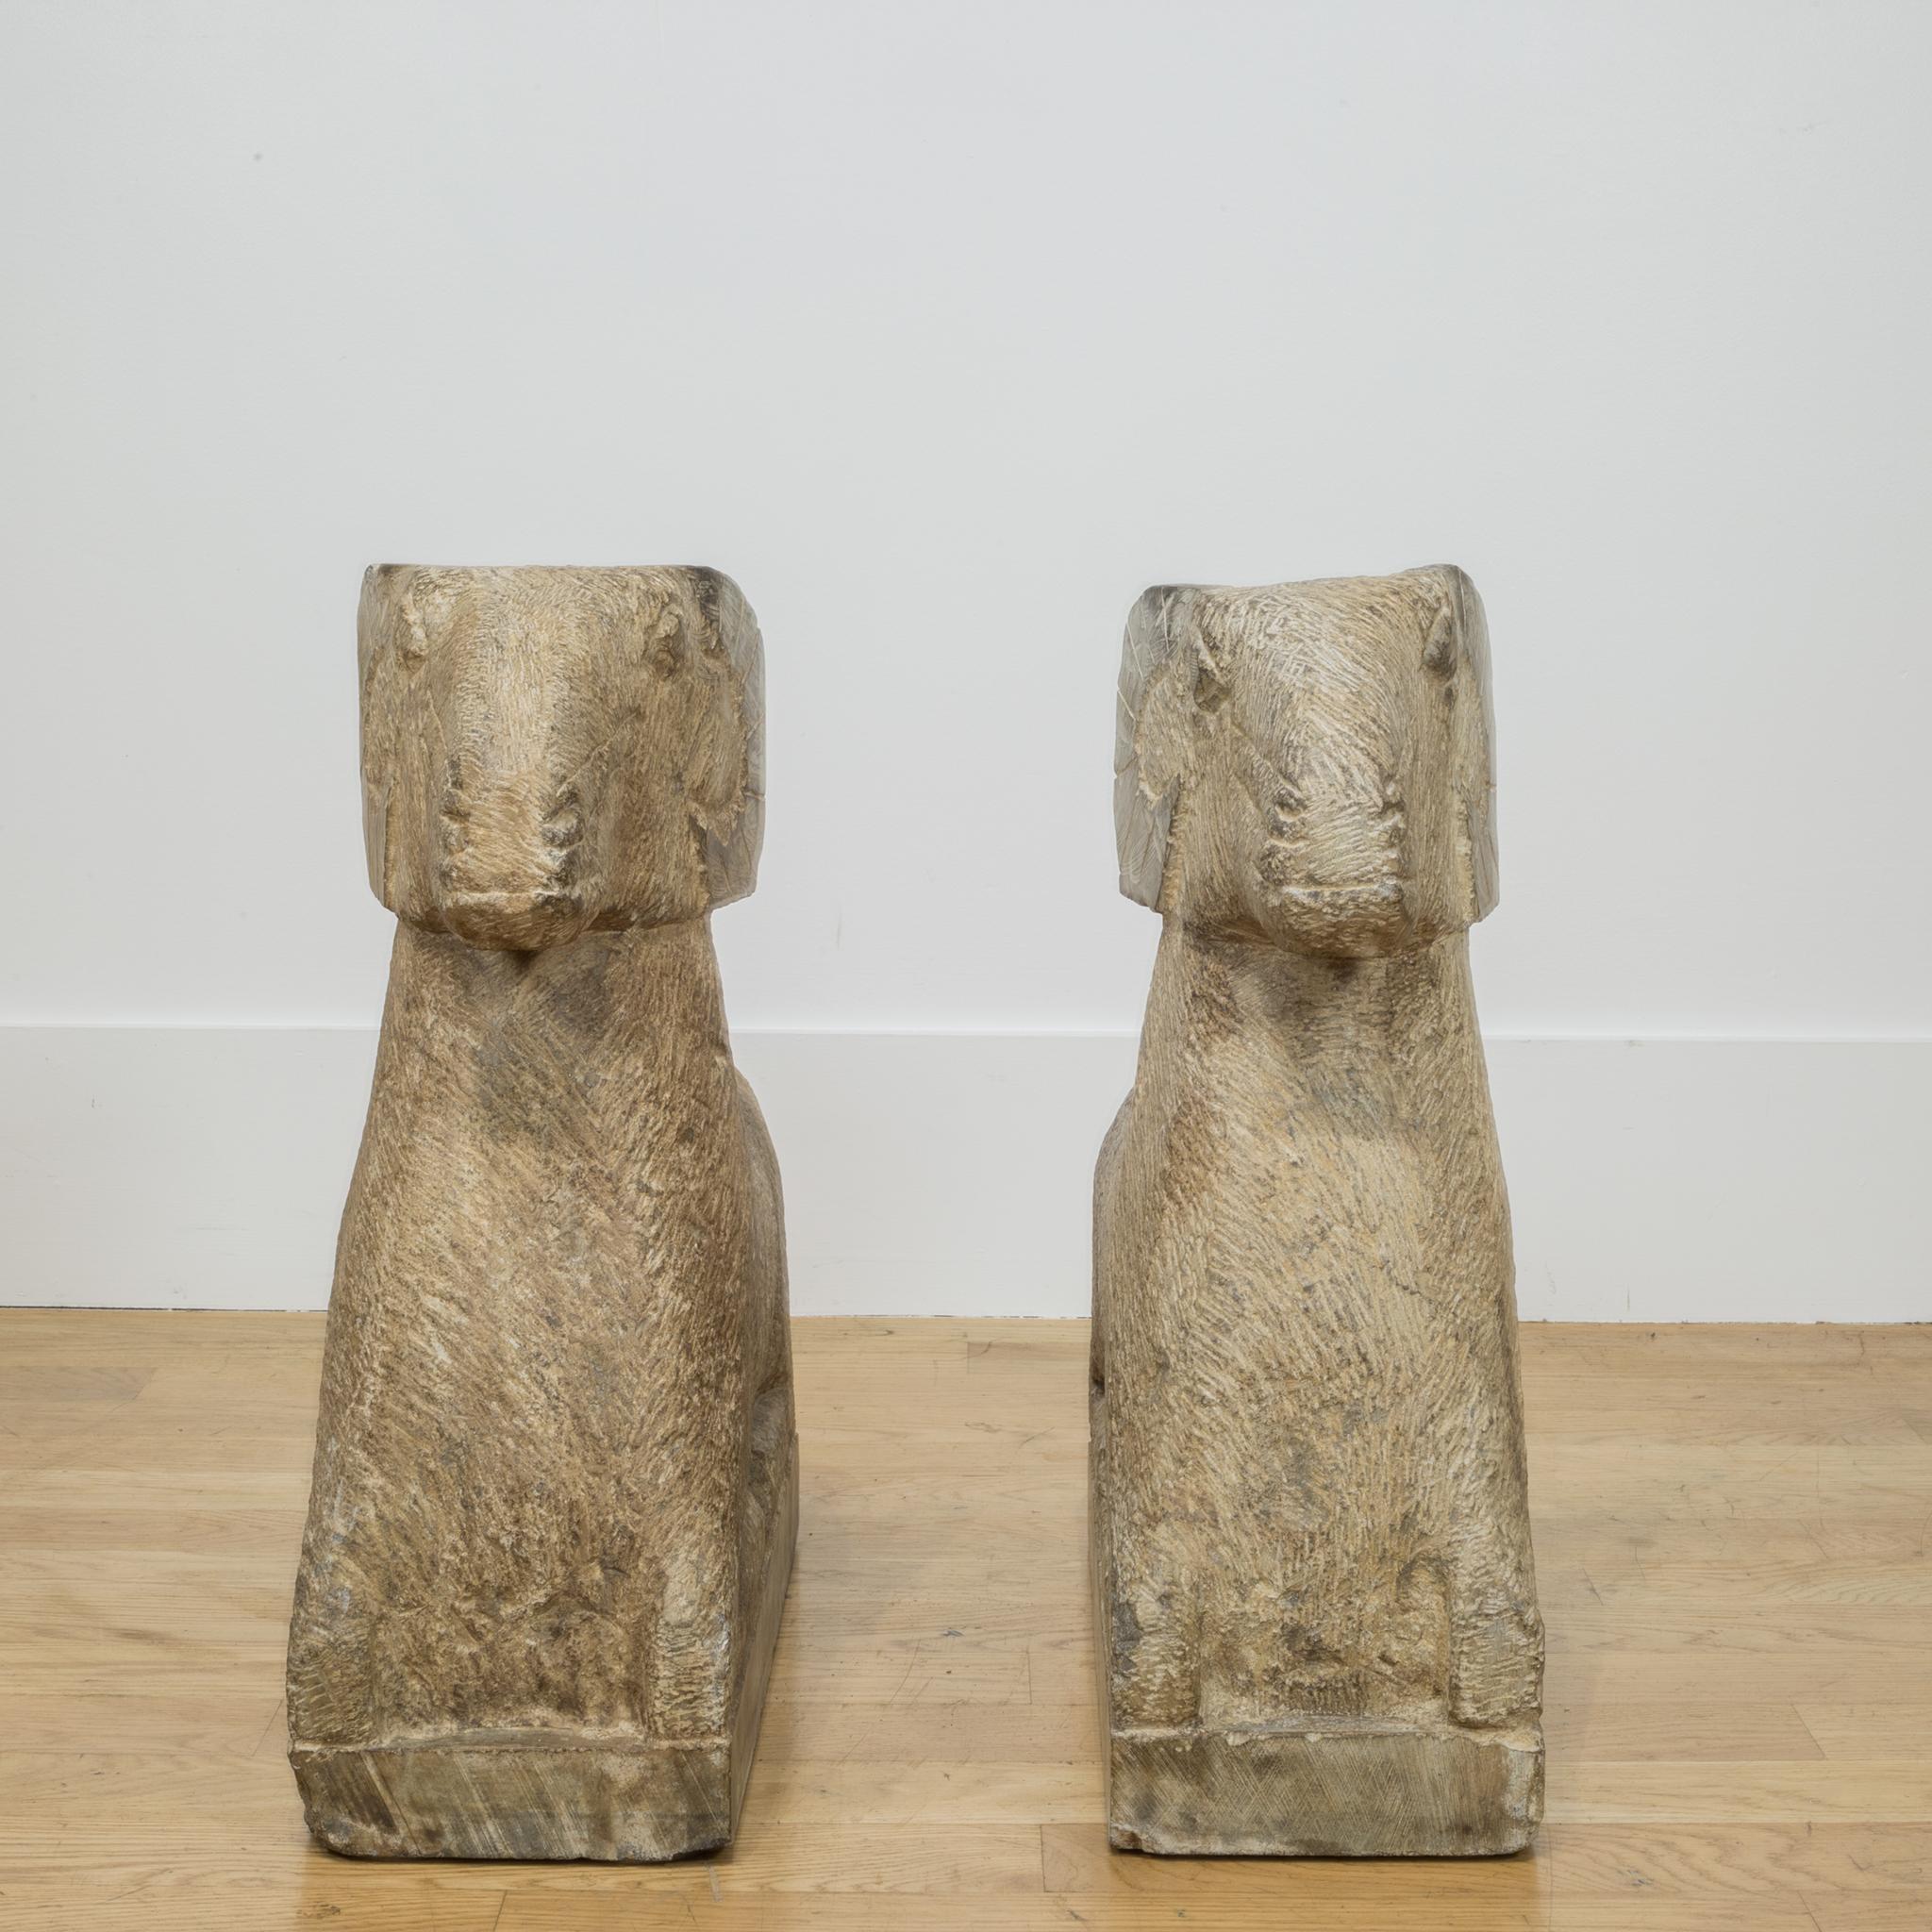 About:

A striking pair of art deco style rams in a reclining position. Carved from blocks of solid sandstone, each ram is intricately carved to show texture in the horns, eyes and the coat. The sculptures can be used in an indoor setting or as